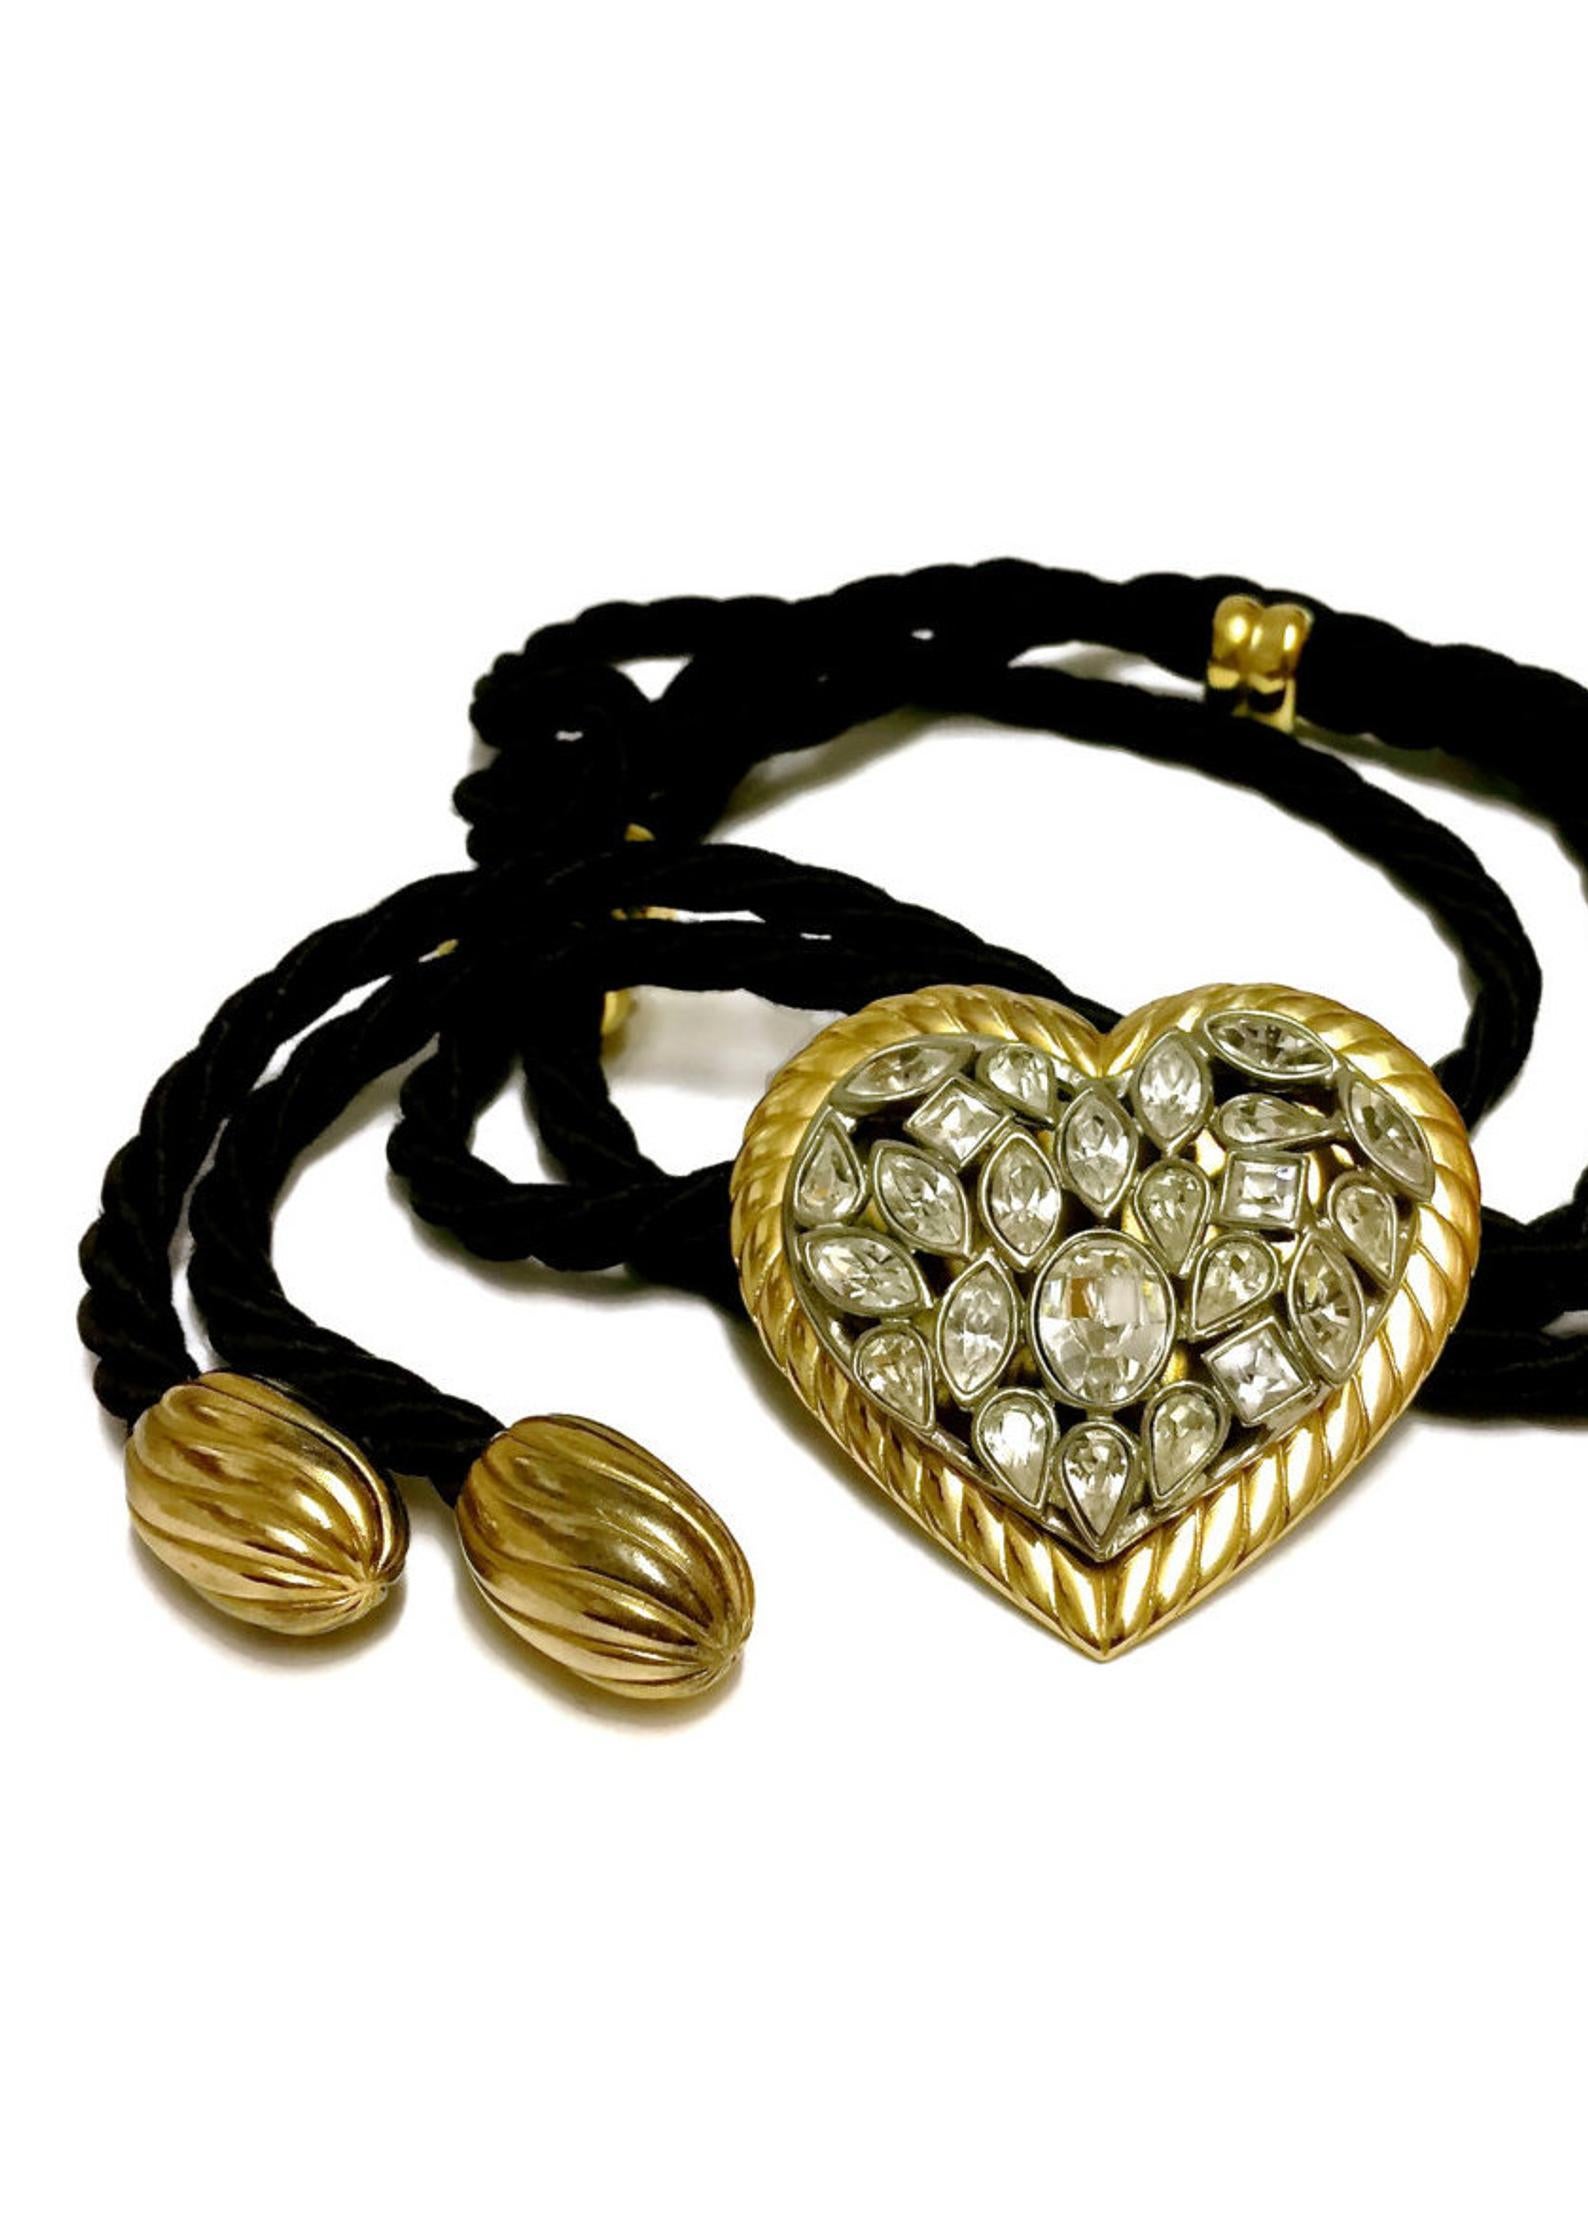 Vintage YSL Yves Saint Laurent by Robert Goossens Heart Stone Cord Necklace Belt

Measurements:
Height: 2 4/8 inches (6.35 cm)
Width: 2 4/8 inches (6.35 cm)
Length: 38 inches (96.52 cm)

Features:
- 100% Authentic YVES SAINT LAURENT by Robert